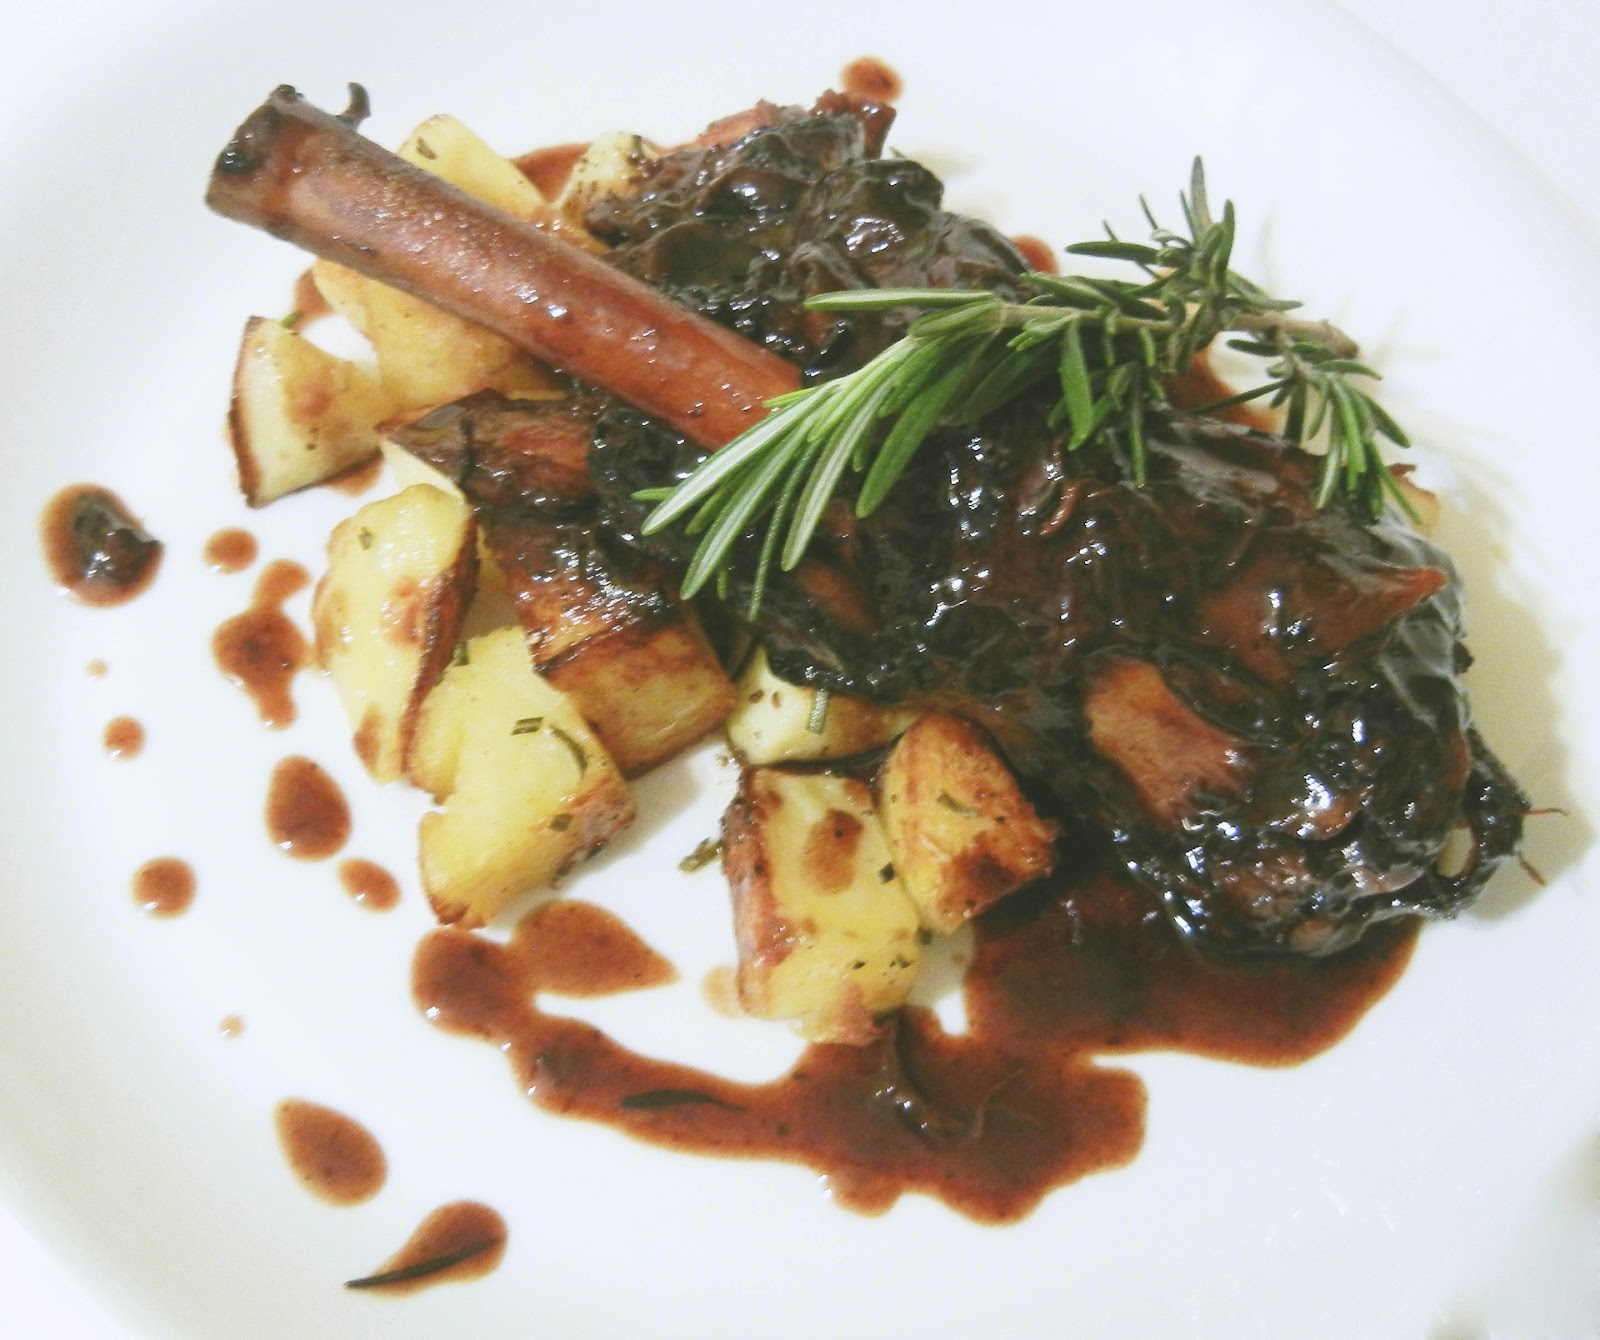 lamb braised slow braise cooked cooking restaurant recipe style